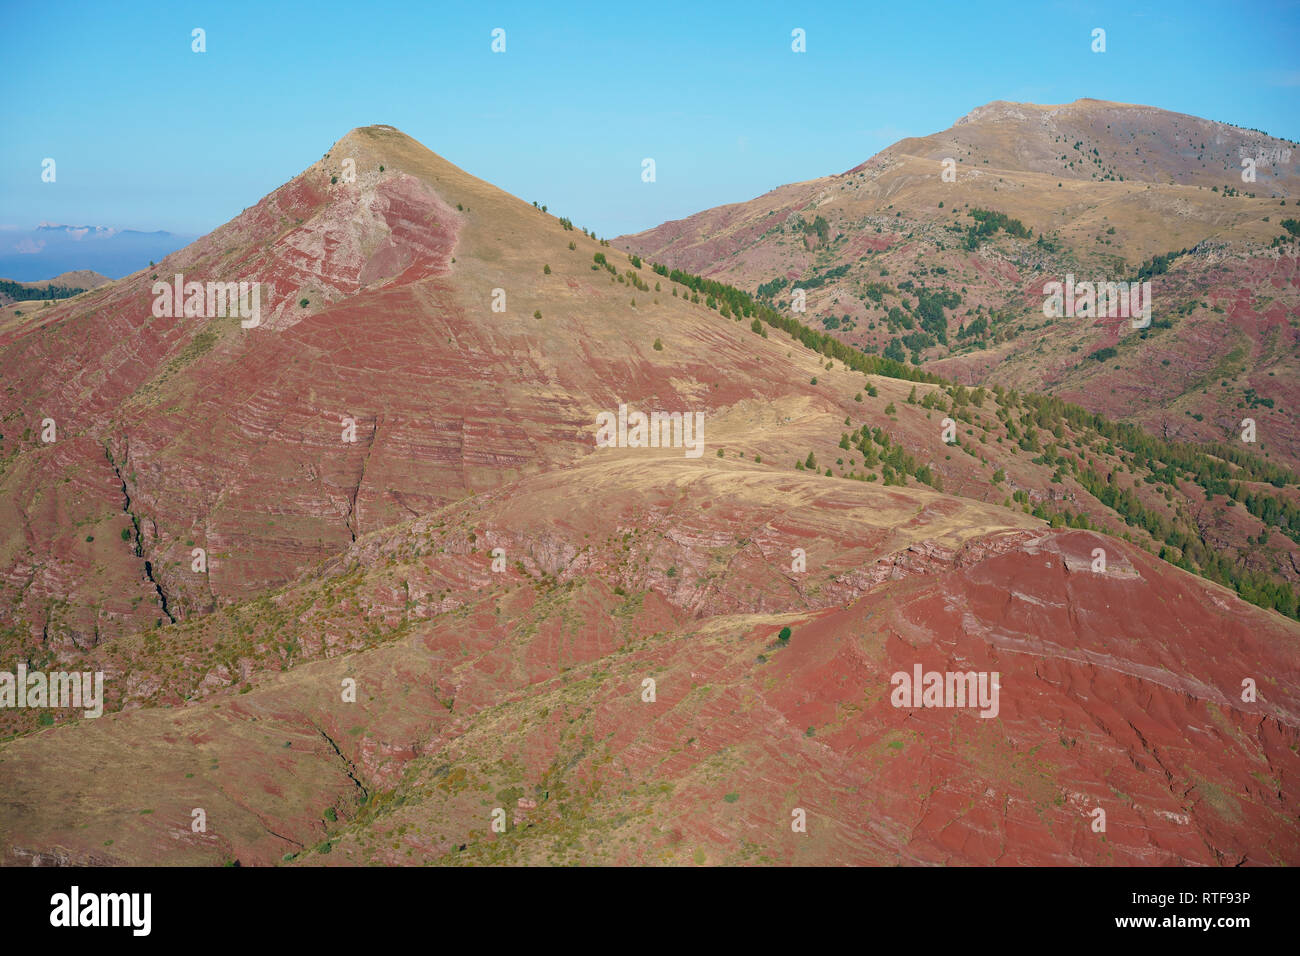 AERIAL VIEW. Unusual landscape of red rock in the Alps. Tête de Rigaud summit (left) and Dome de Barrot (right). Rigaud, Alpes-Maritimes, France. Stock Photo